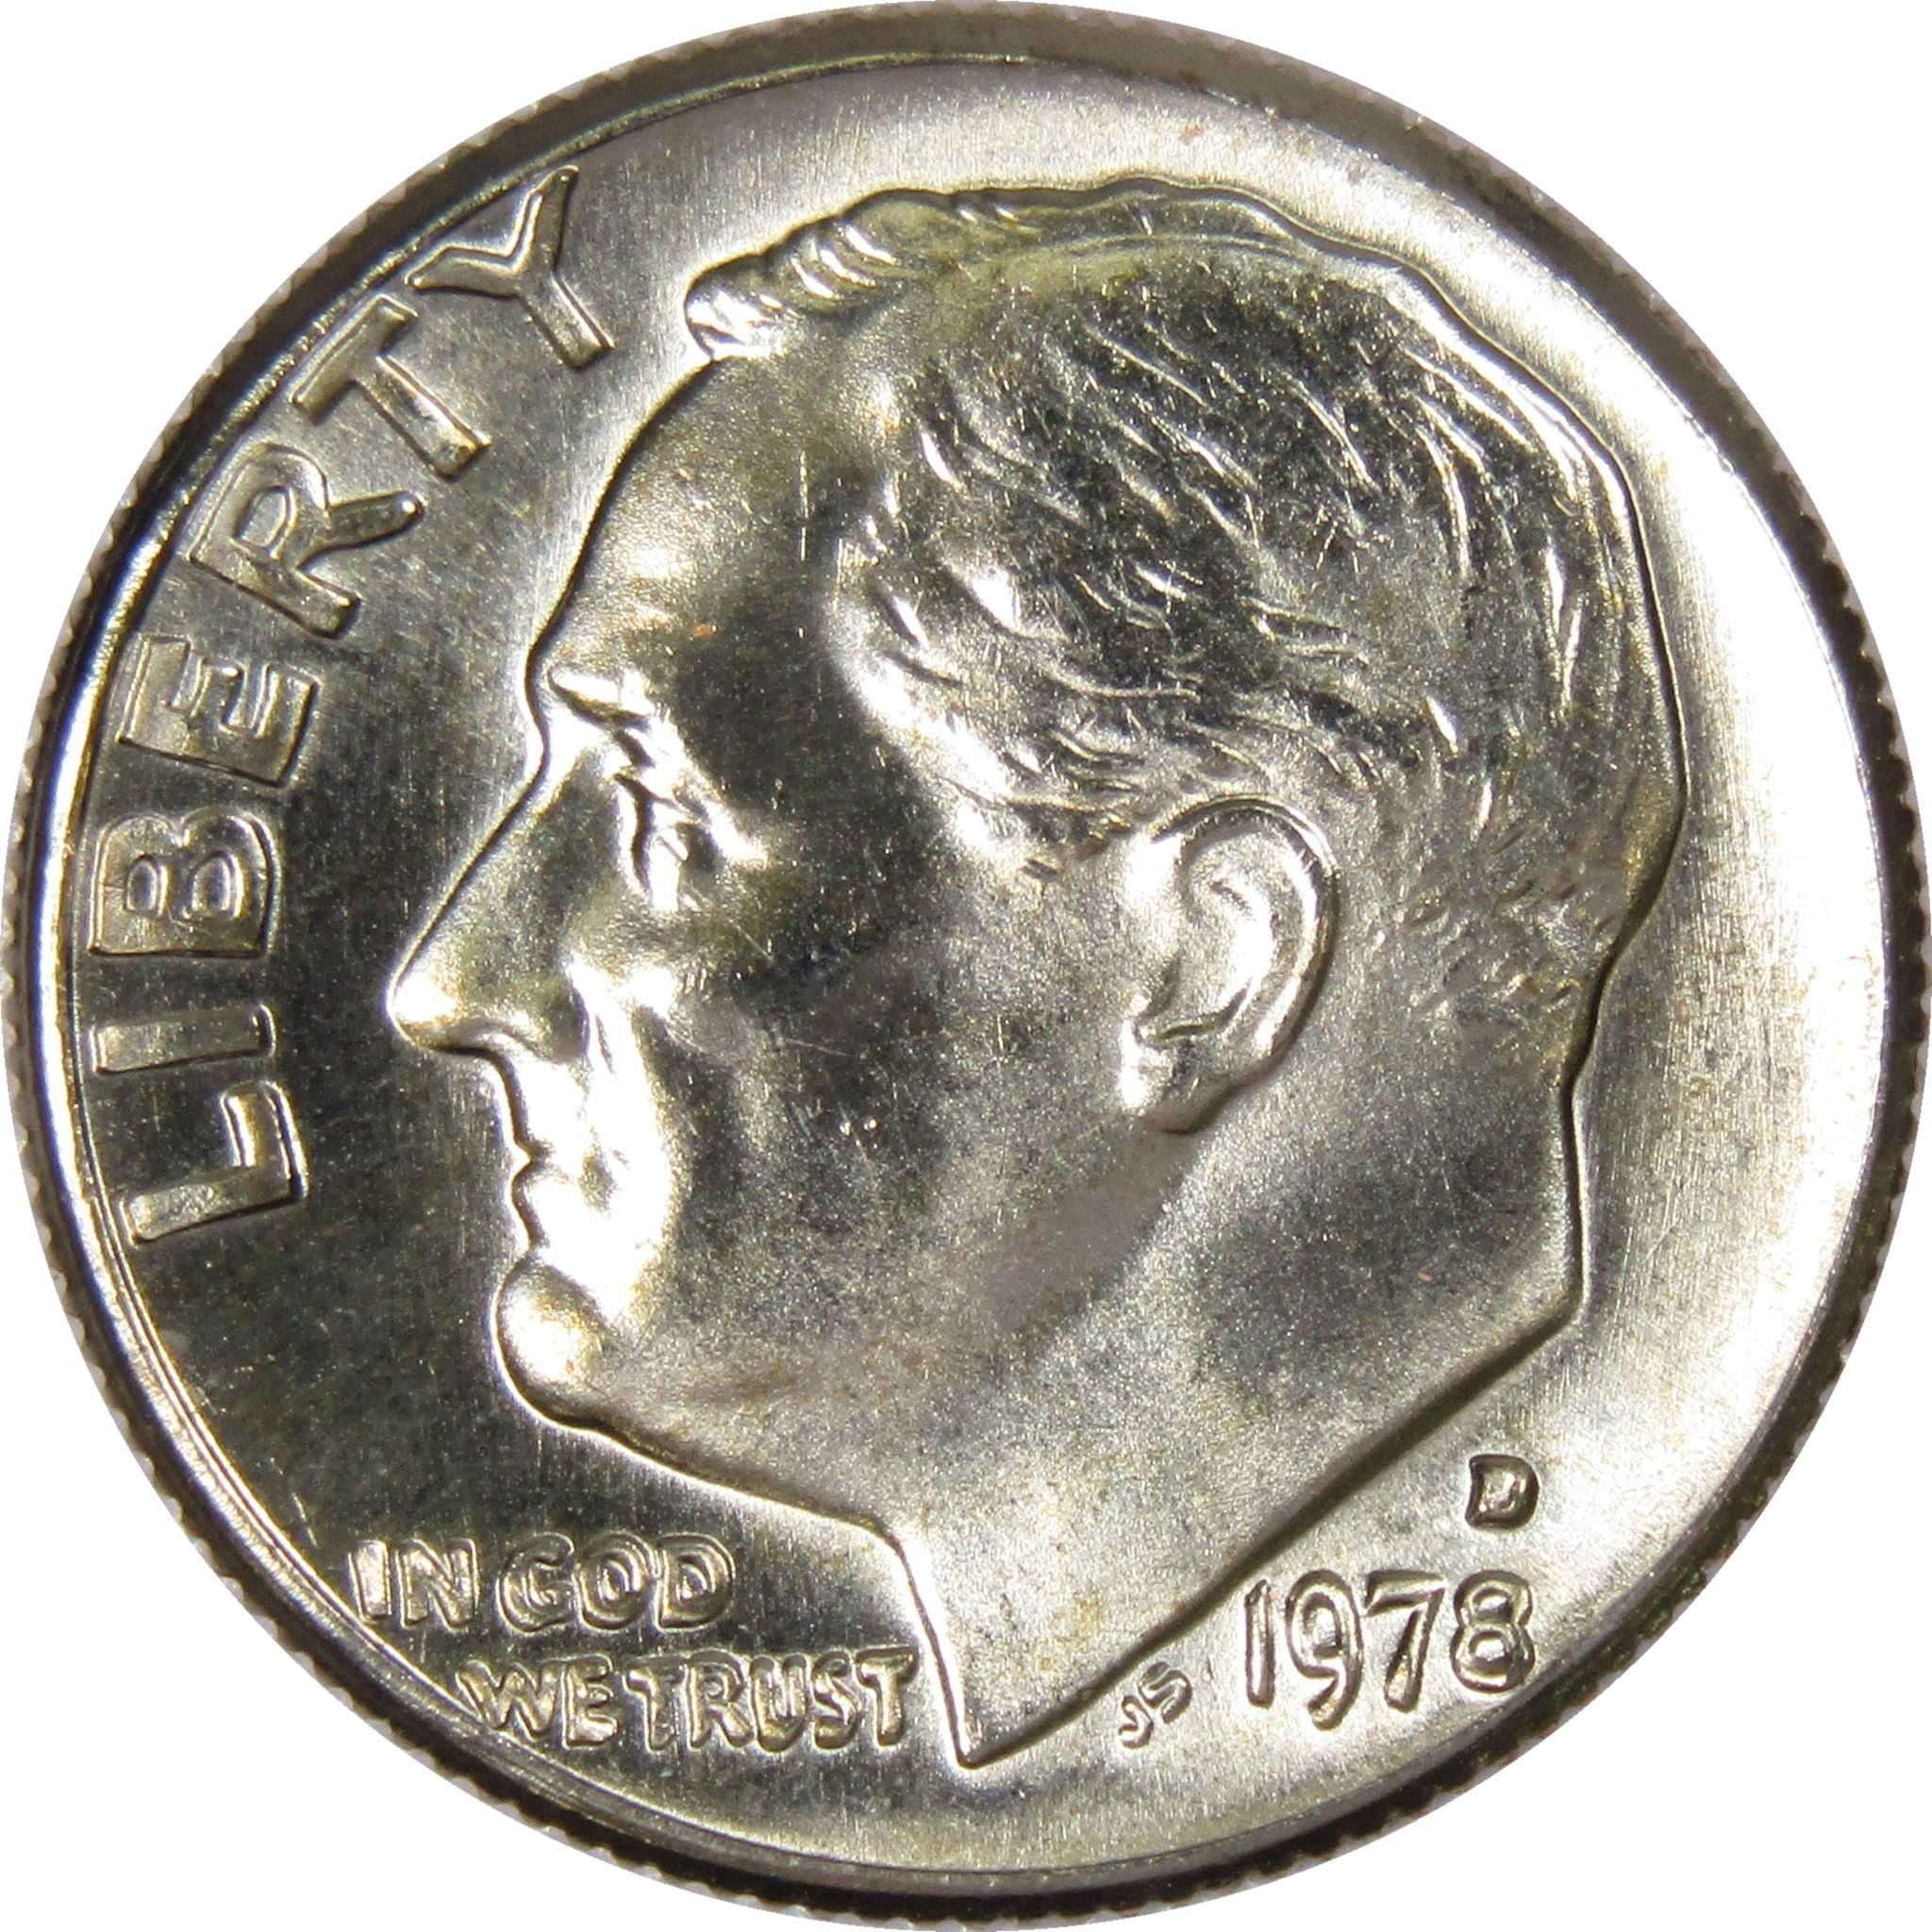 1978 D Roosevelt Dime BU Uncirculated Mint State 10c US Coin Collectible